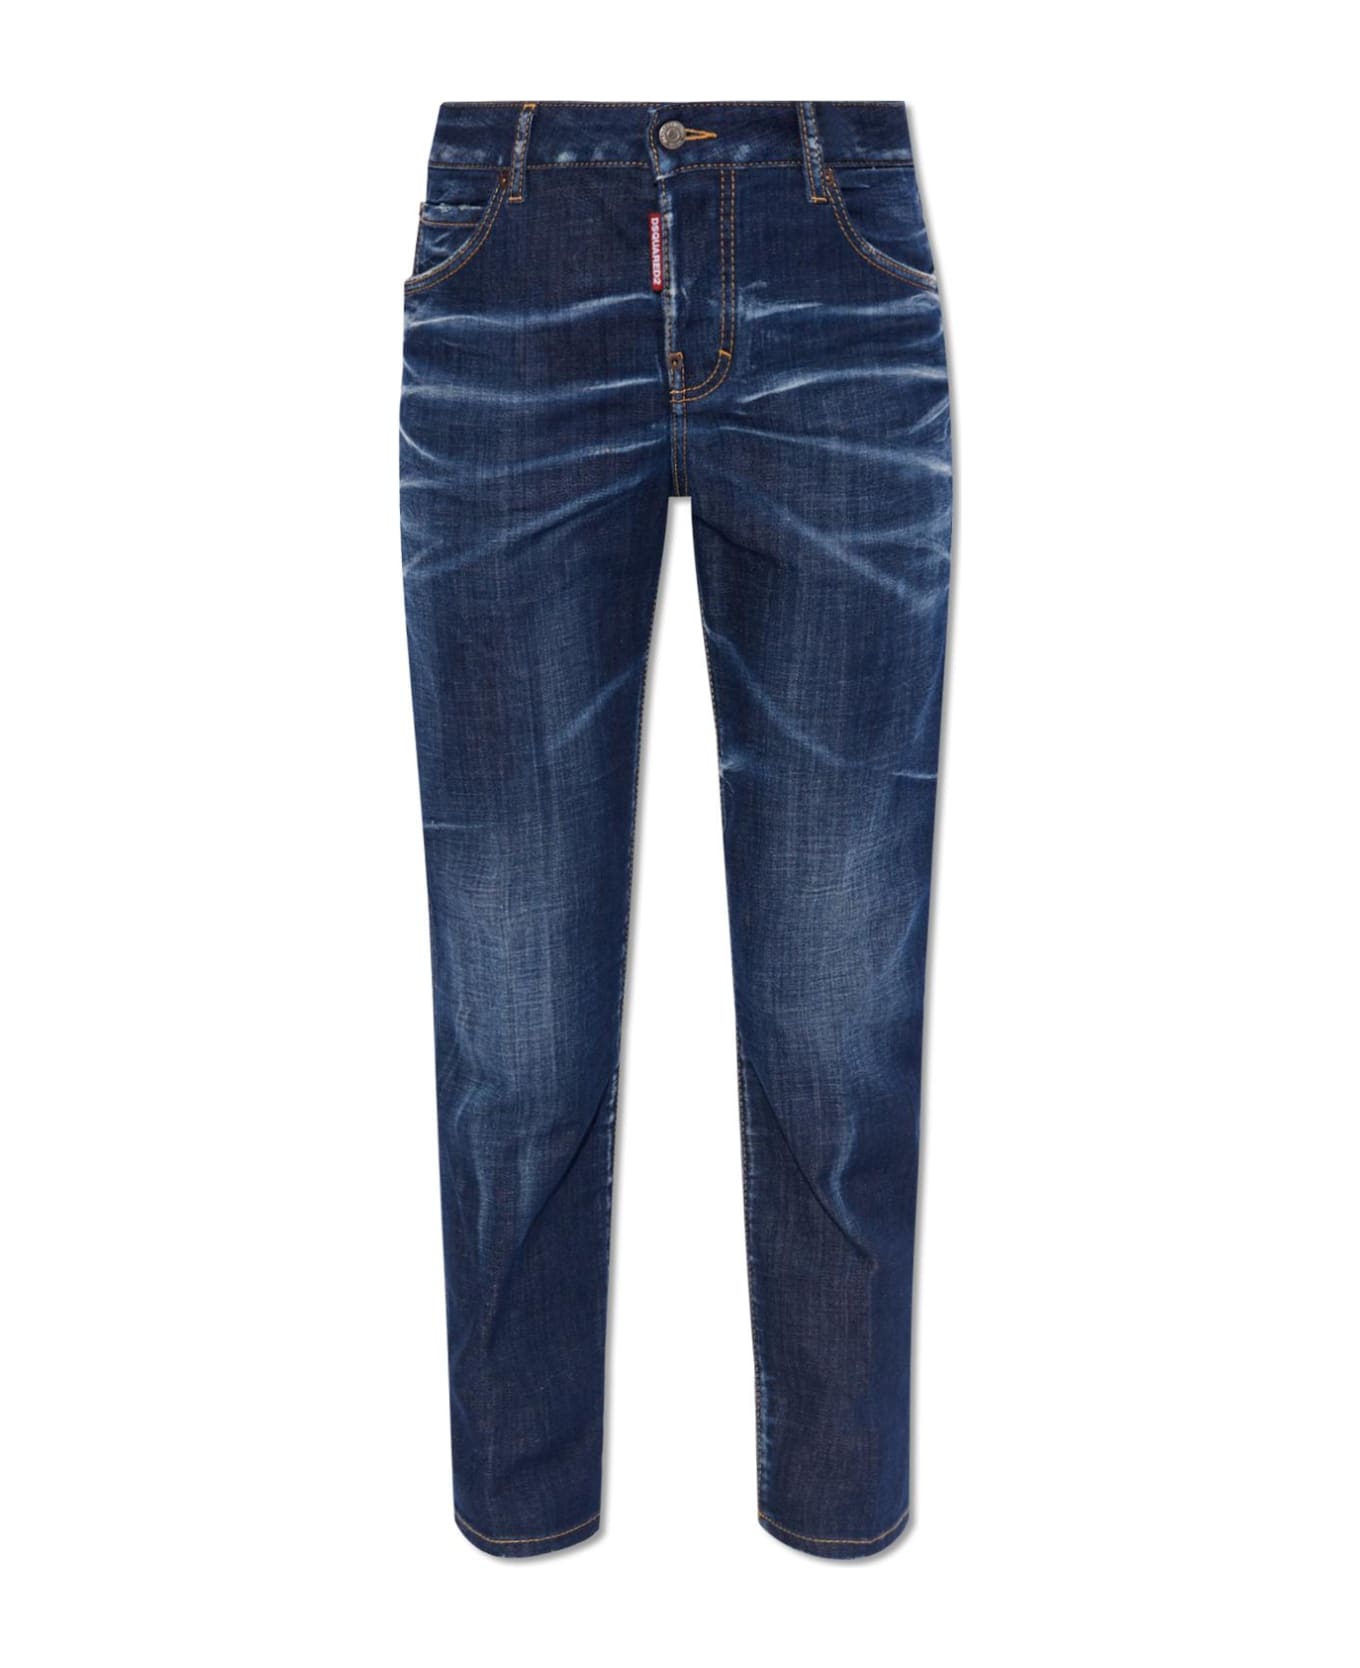 Dsquared2 'cool Girl' Jeans - BLUE デニム